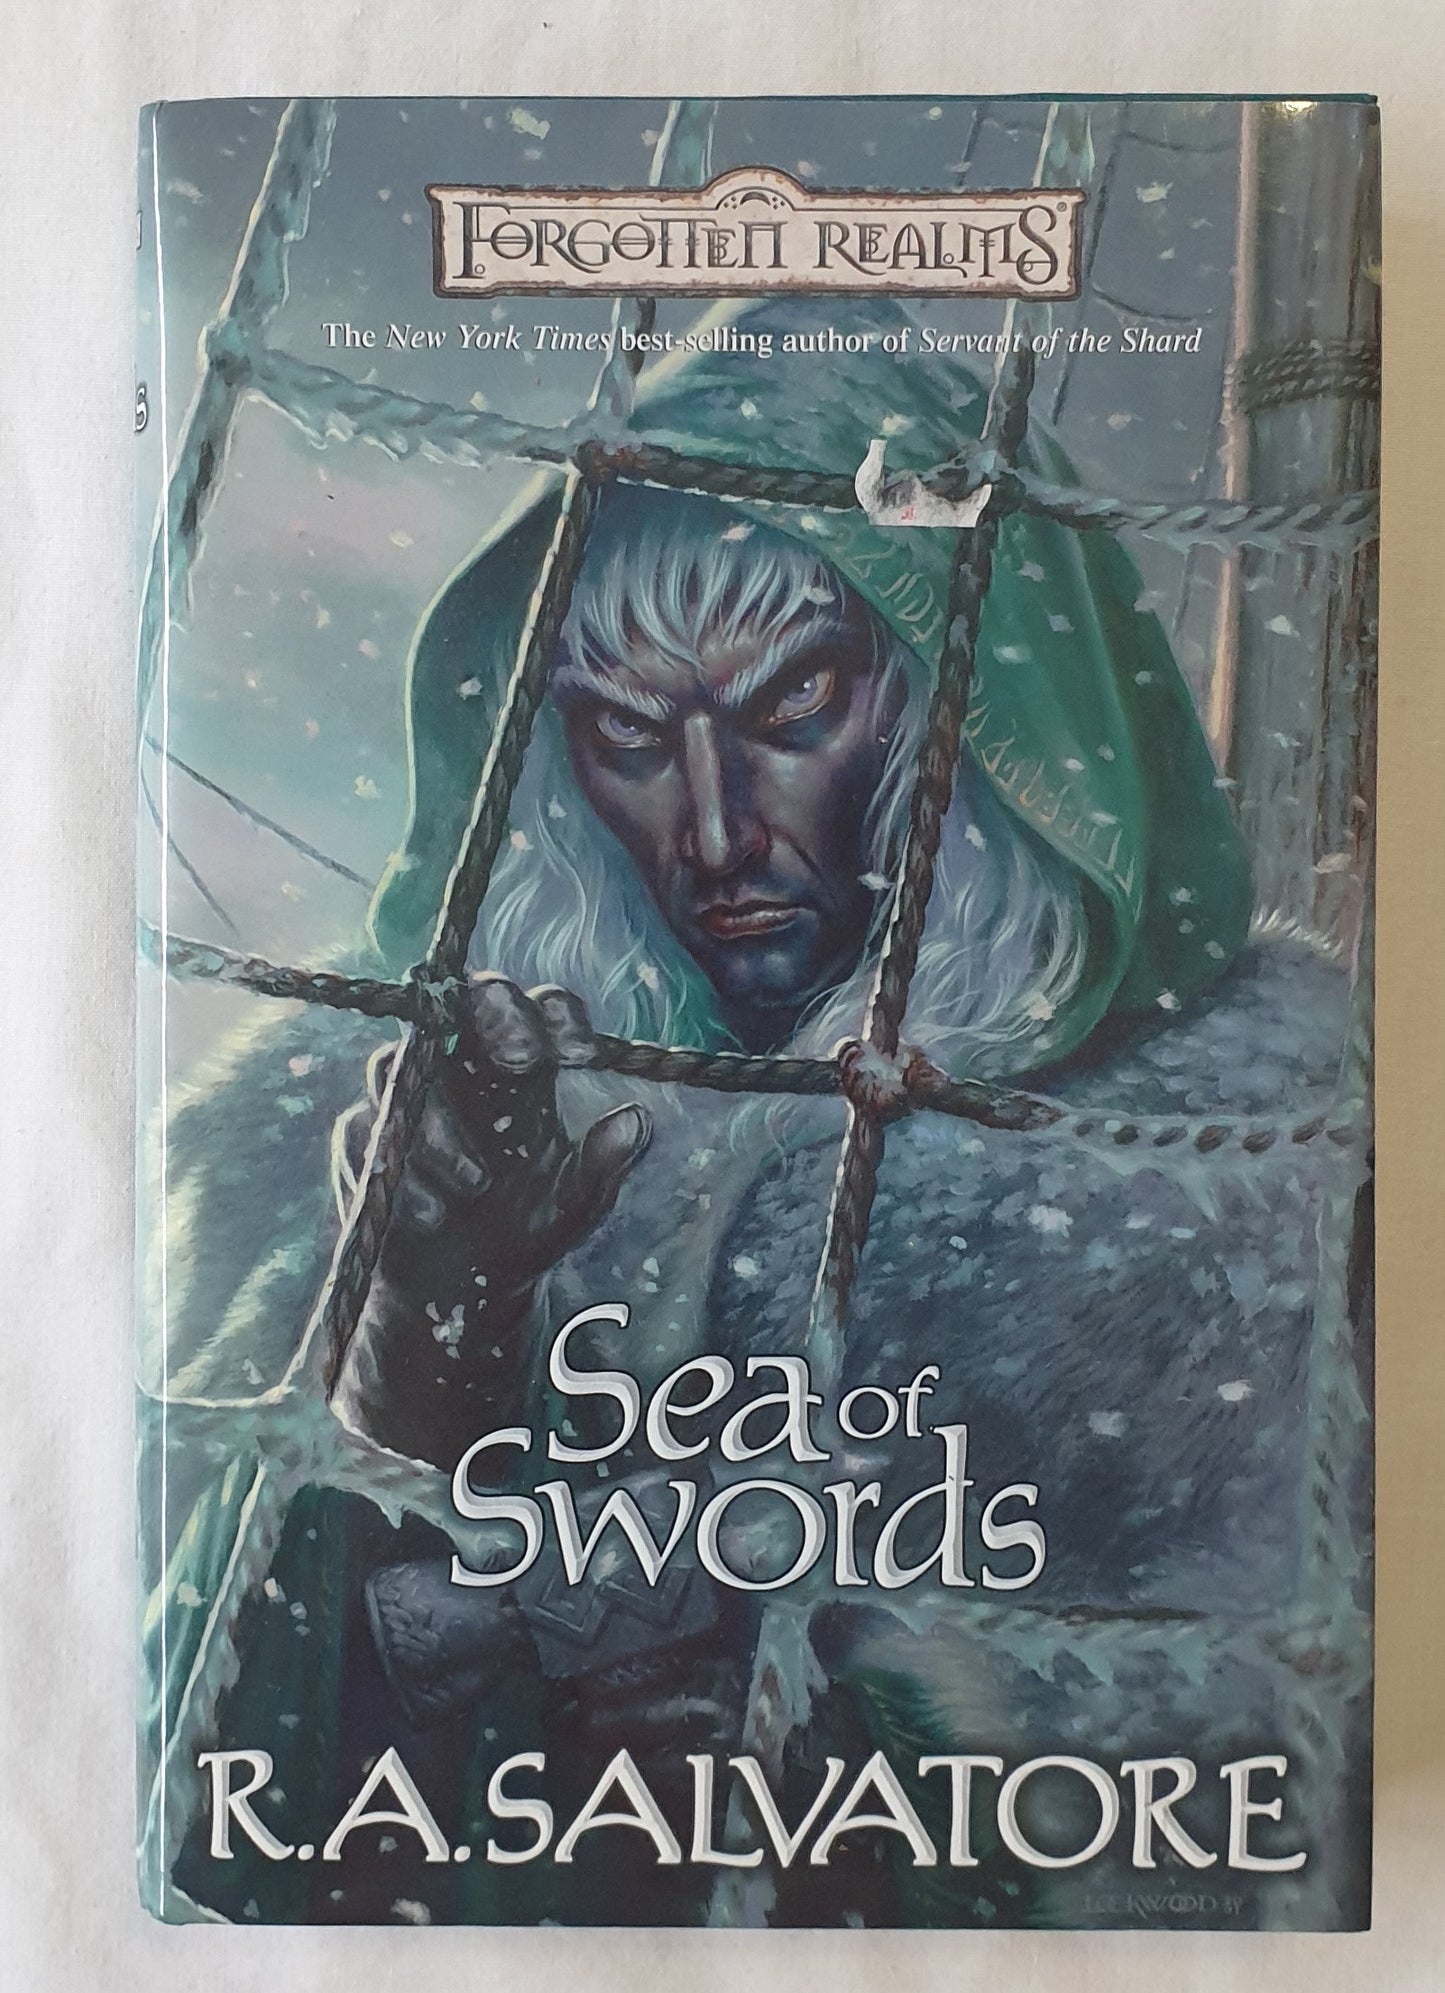 Sea of Swords  by R. A. Salvatore  The Legend of Drizzt #13  (Forgotten Realms)